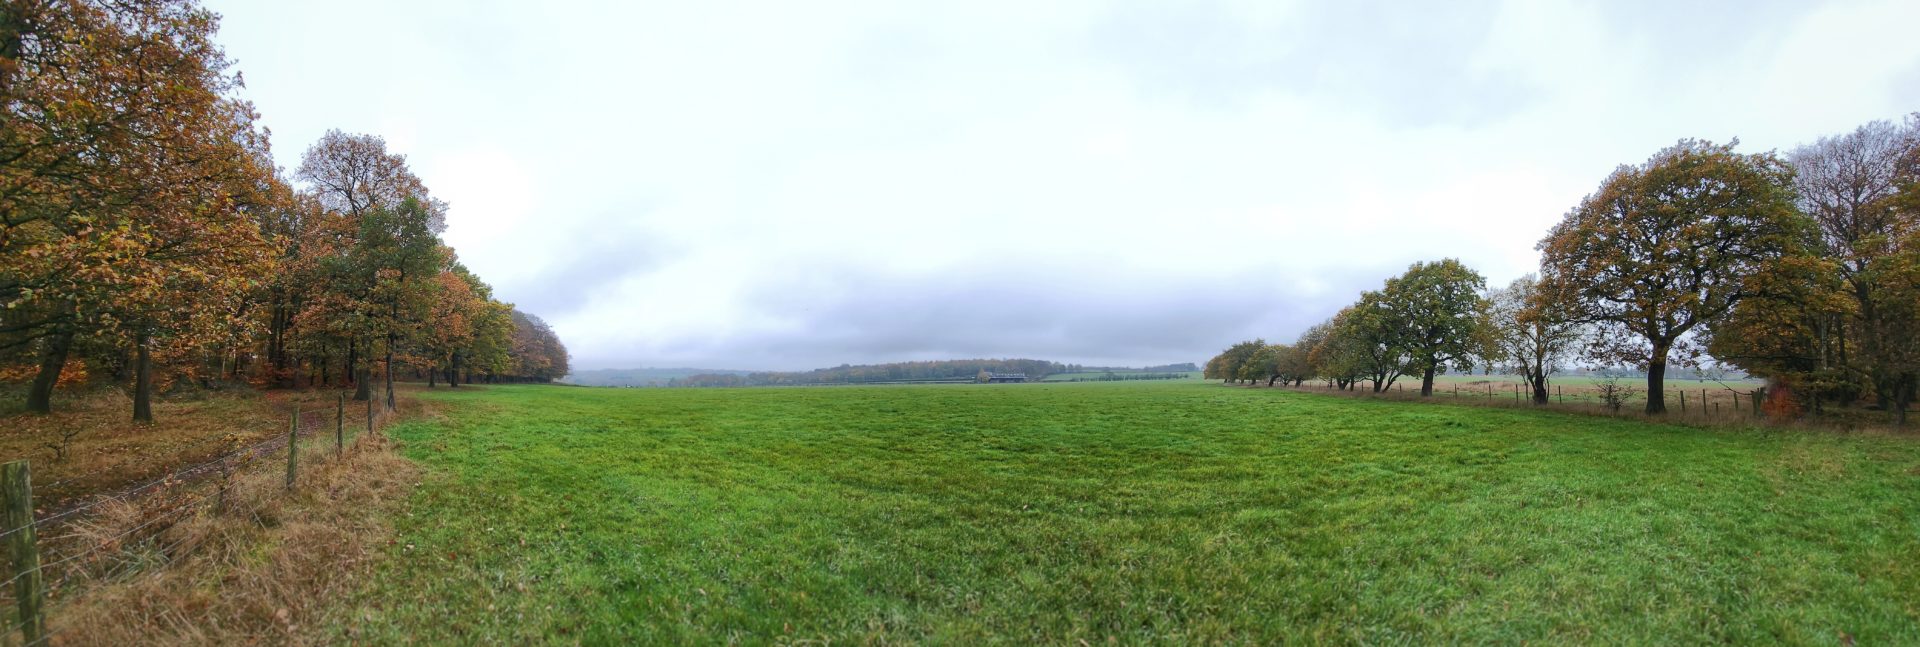 Panorama of a large grassy field, bordered by autumnal trees